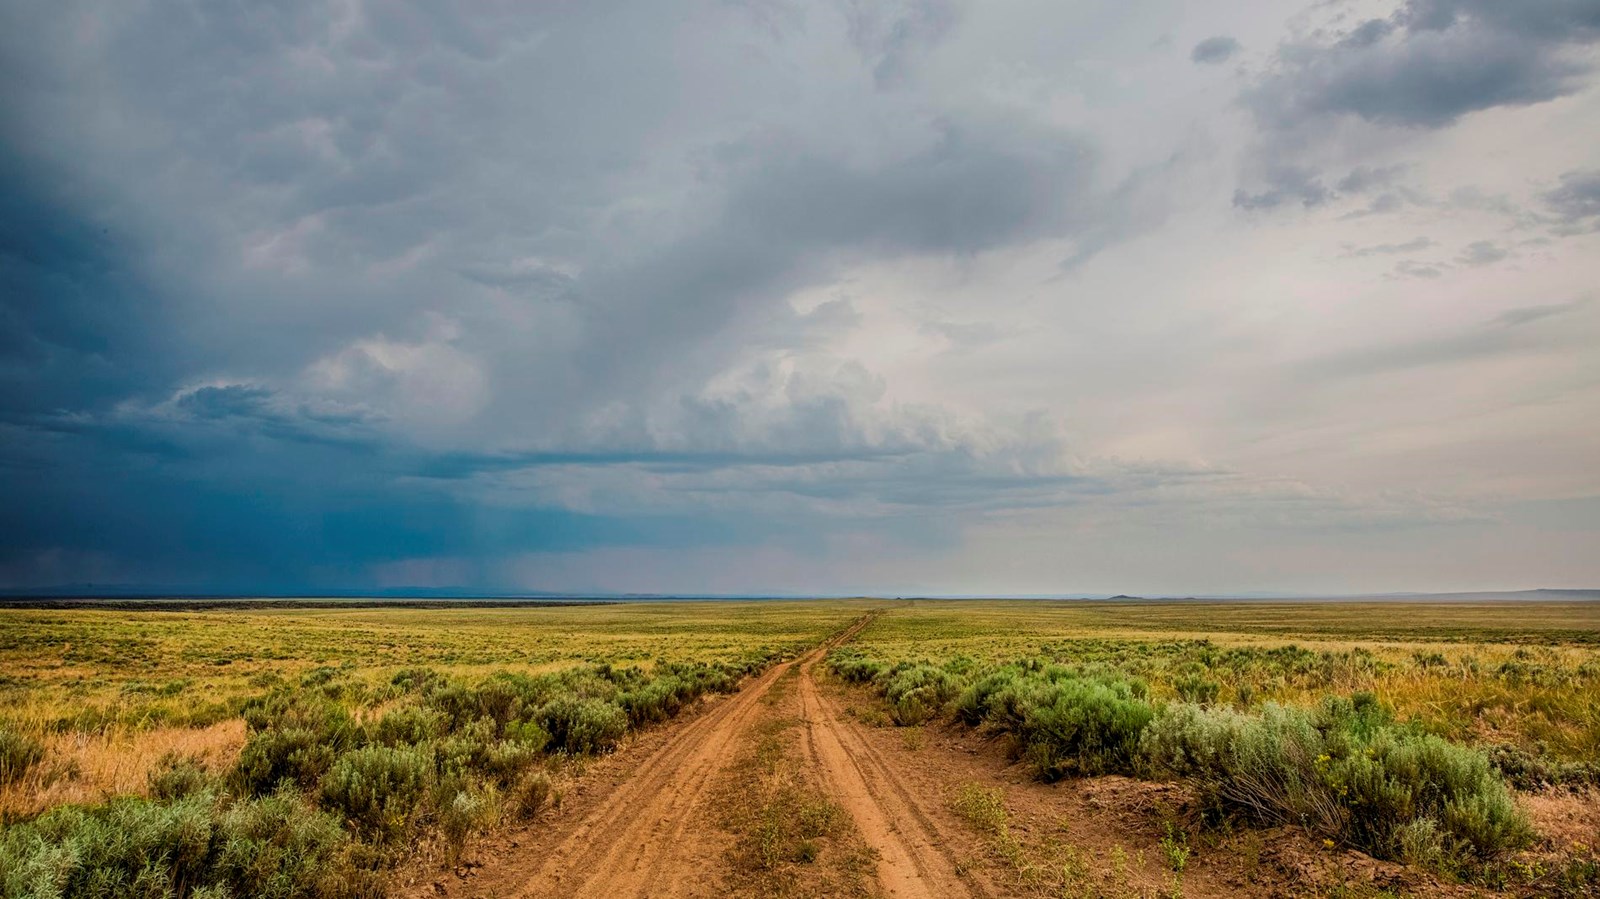 a dirt road stretching across a wide, brush covered landscape on a stormy day